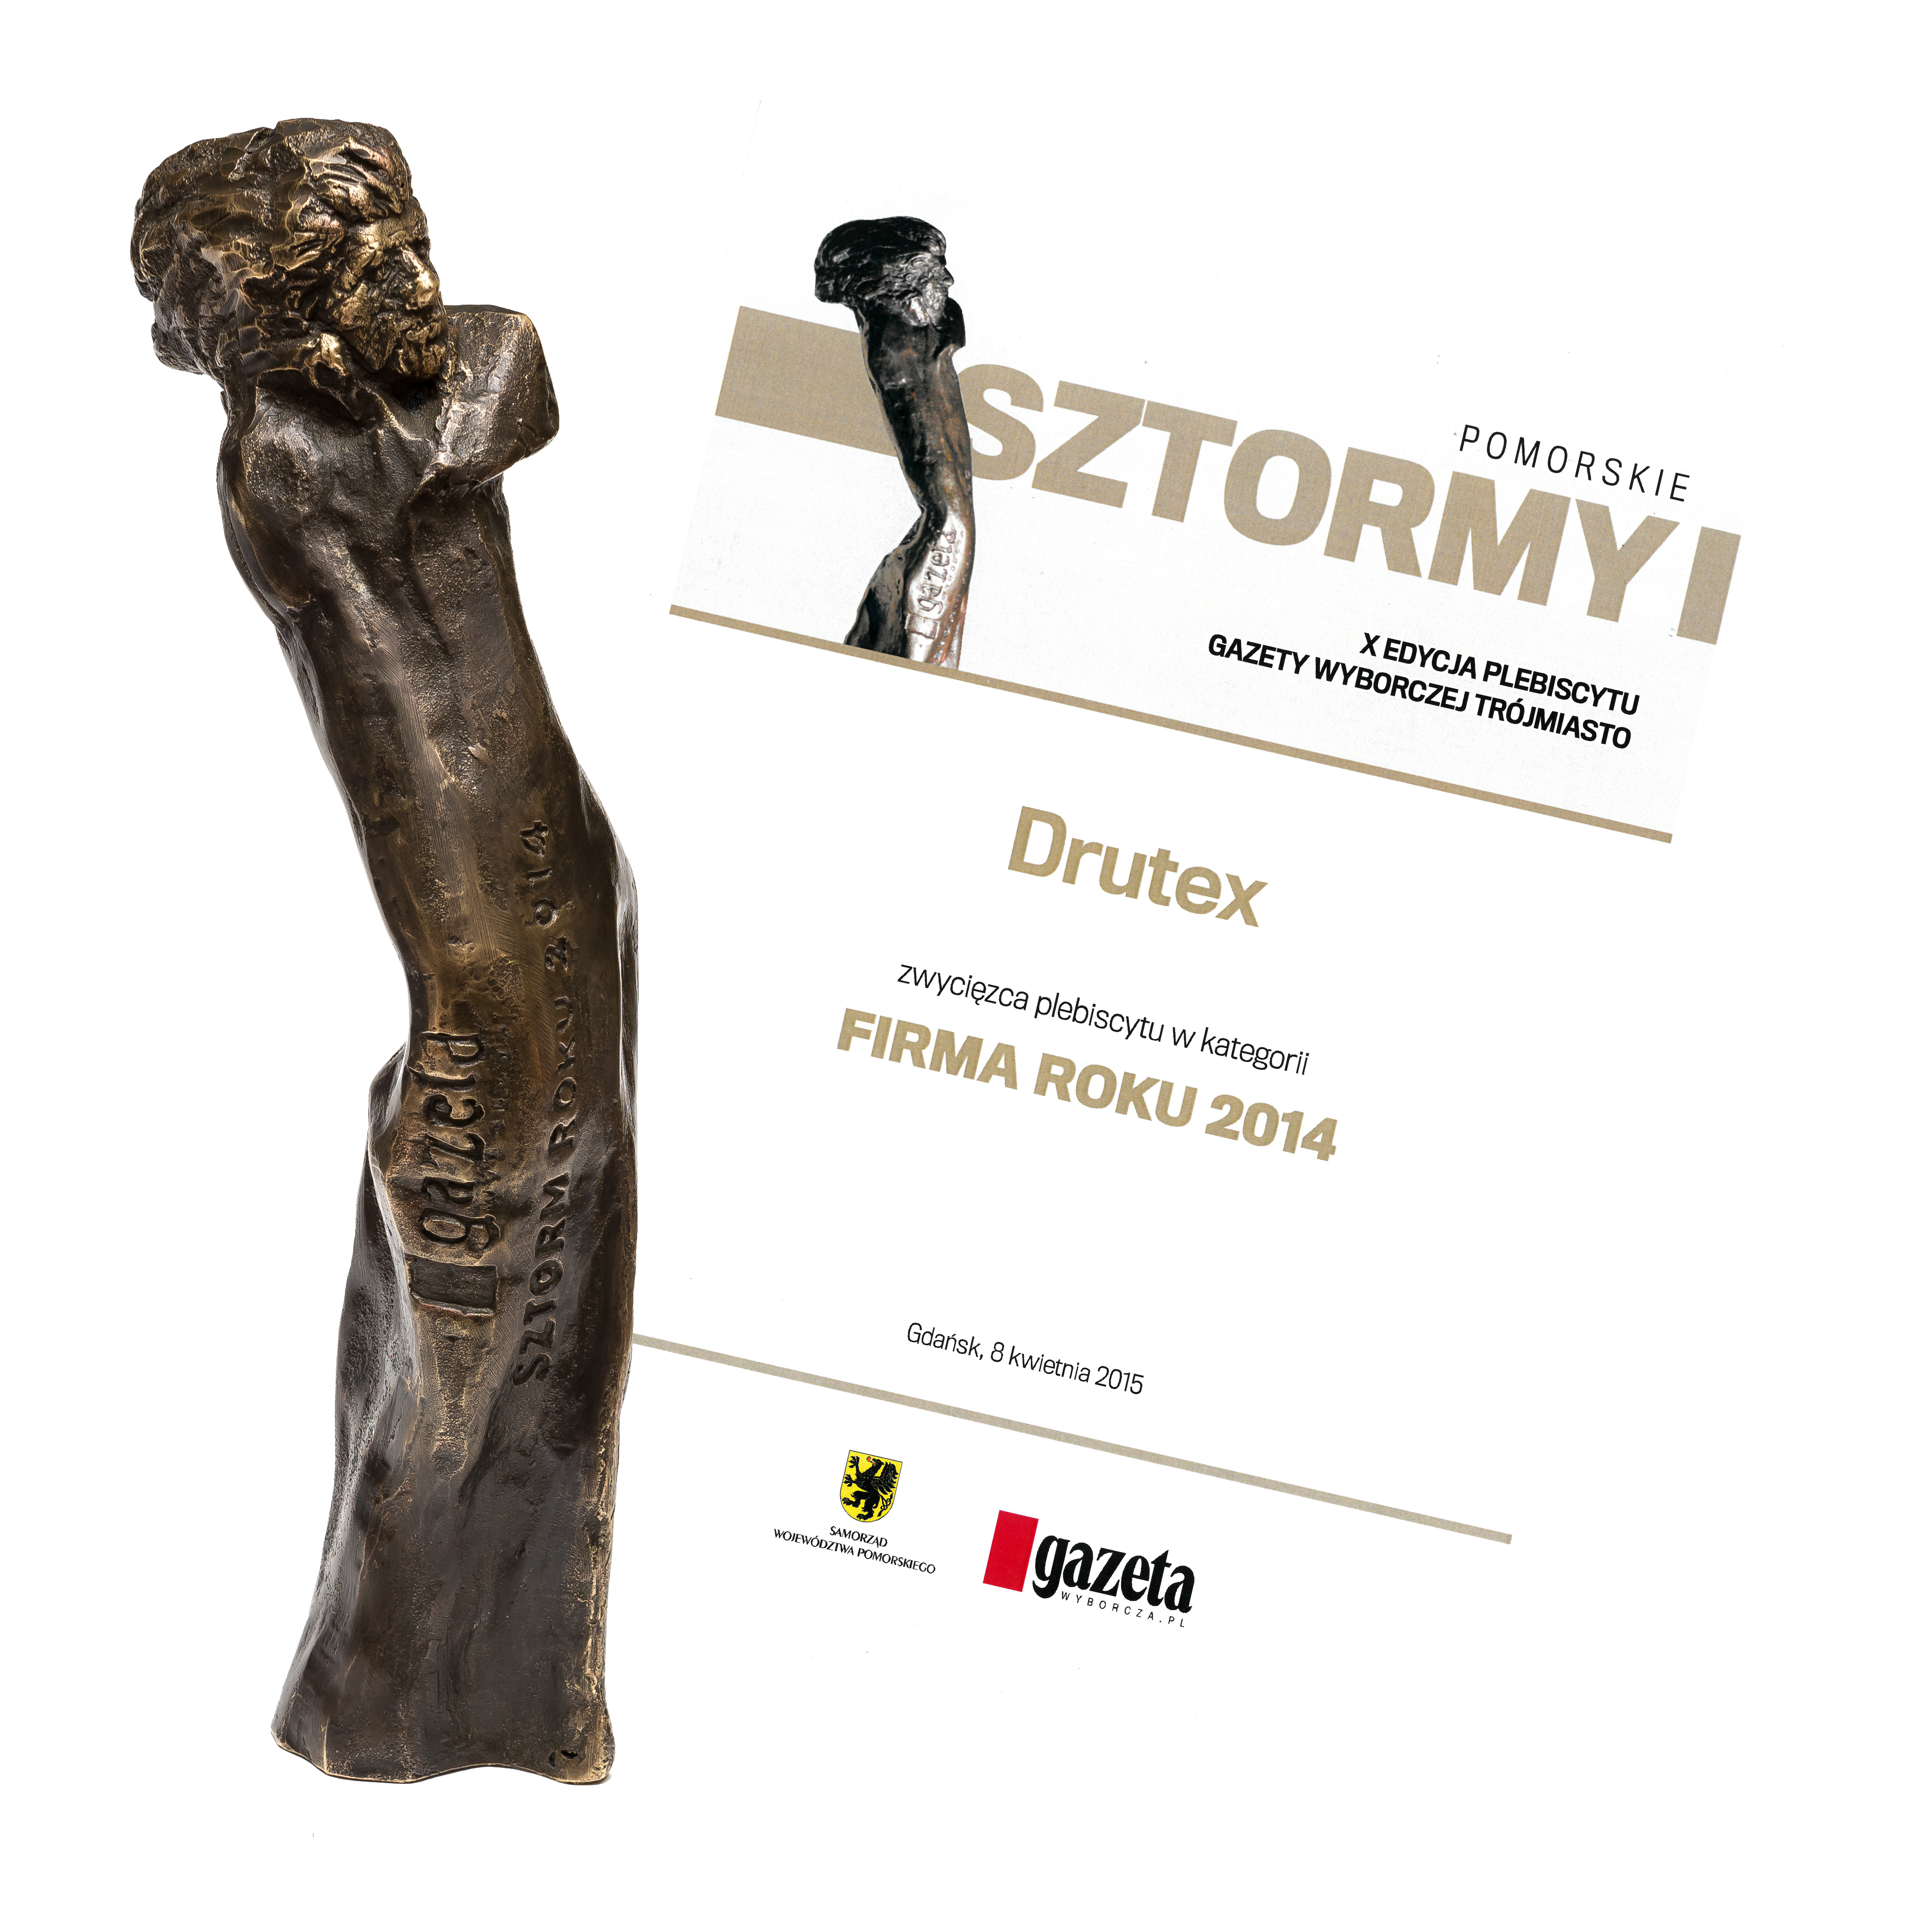 DRUTEX – the Company if the Year!